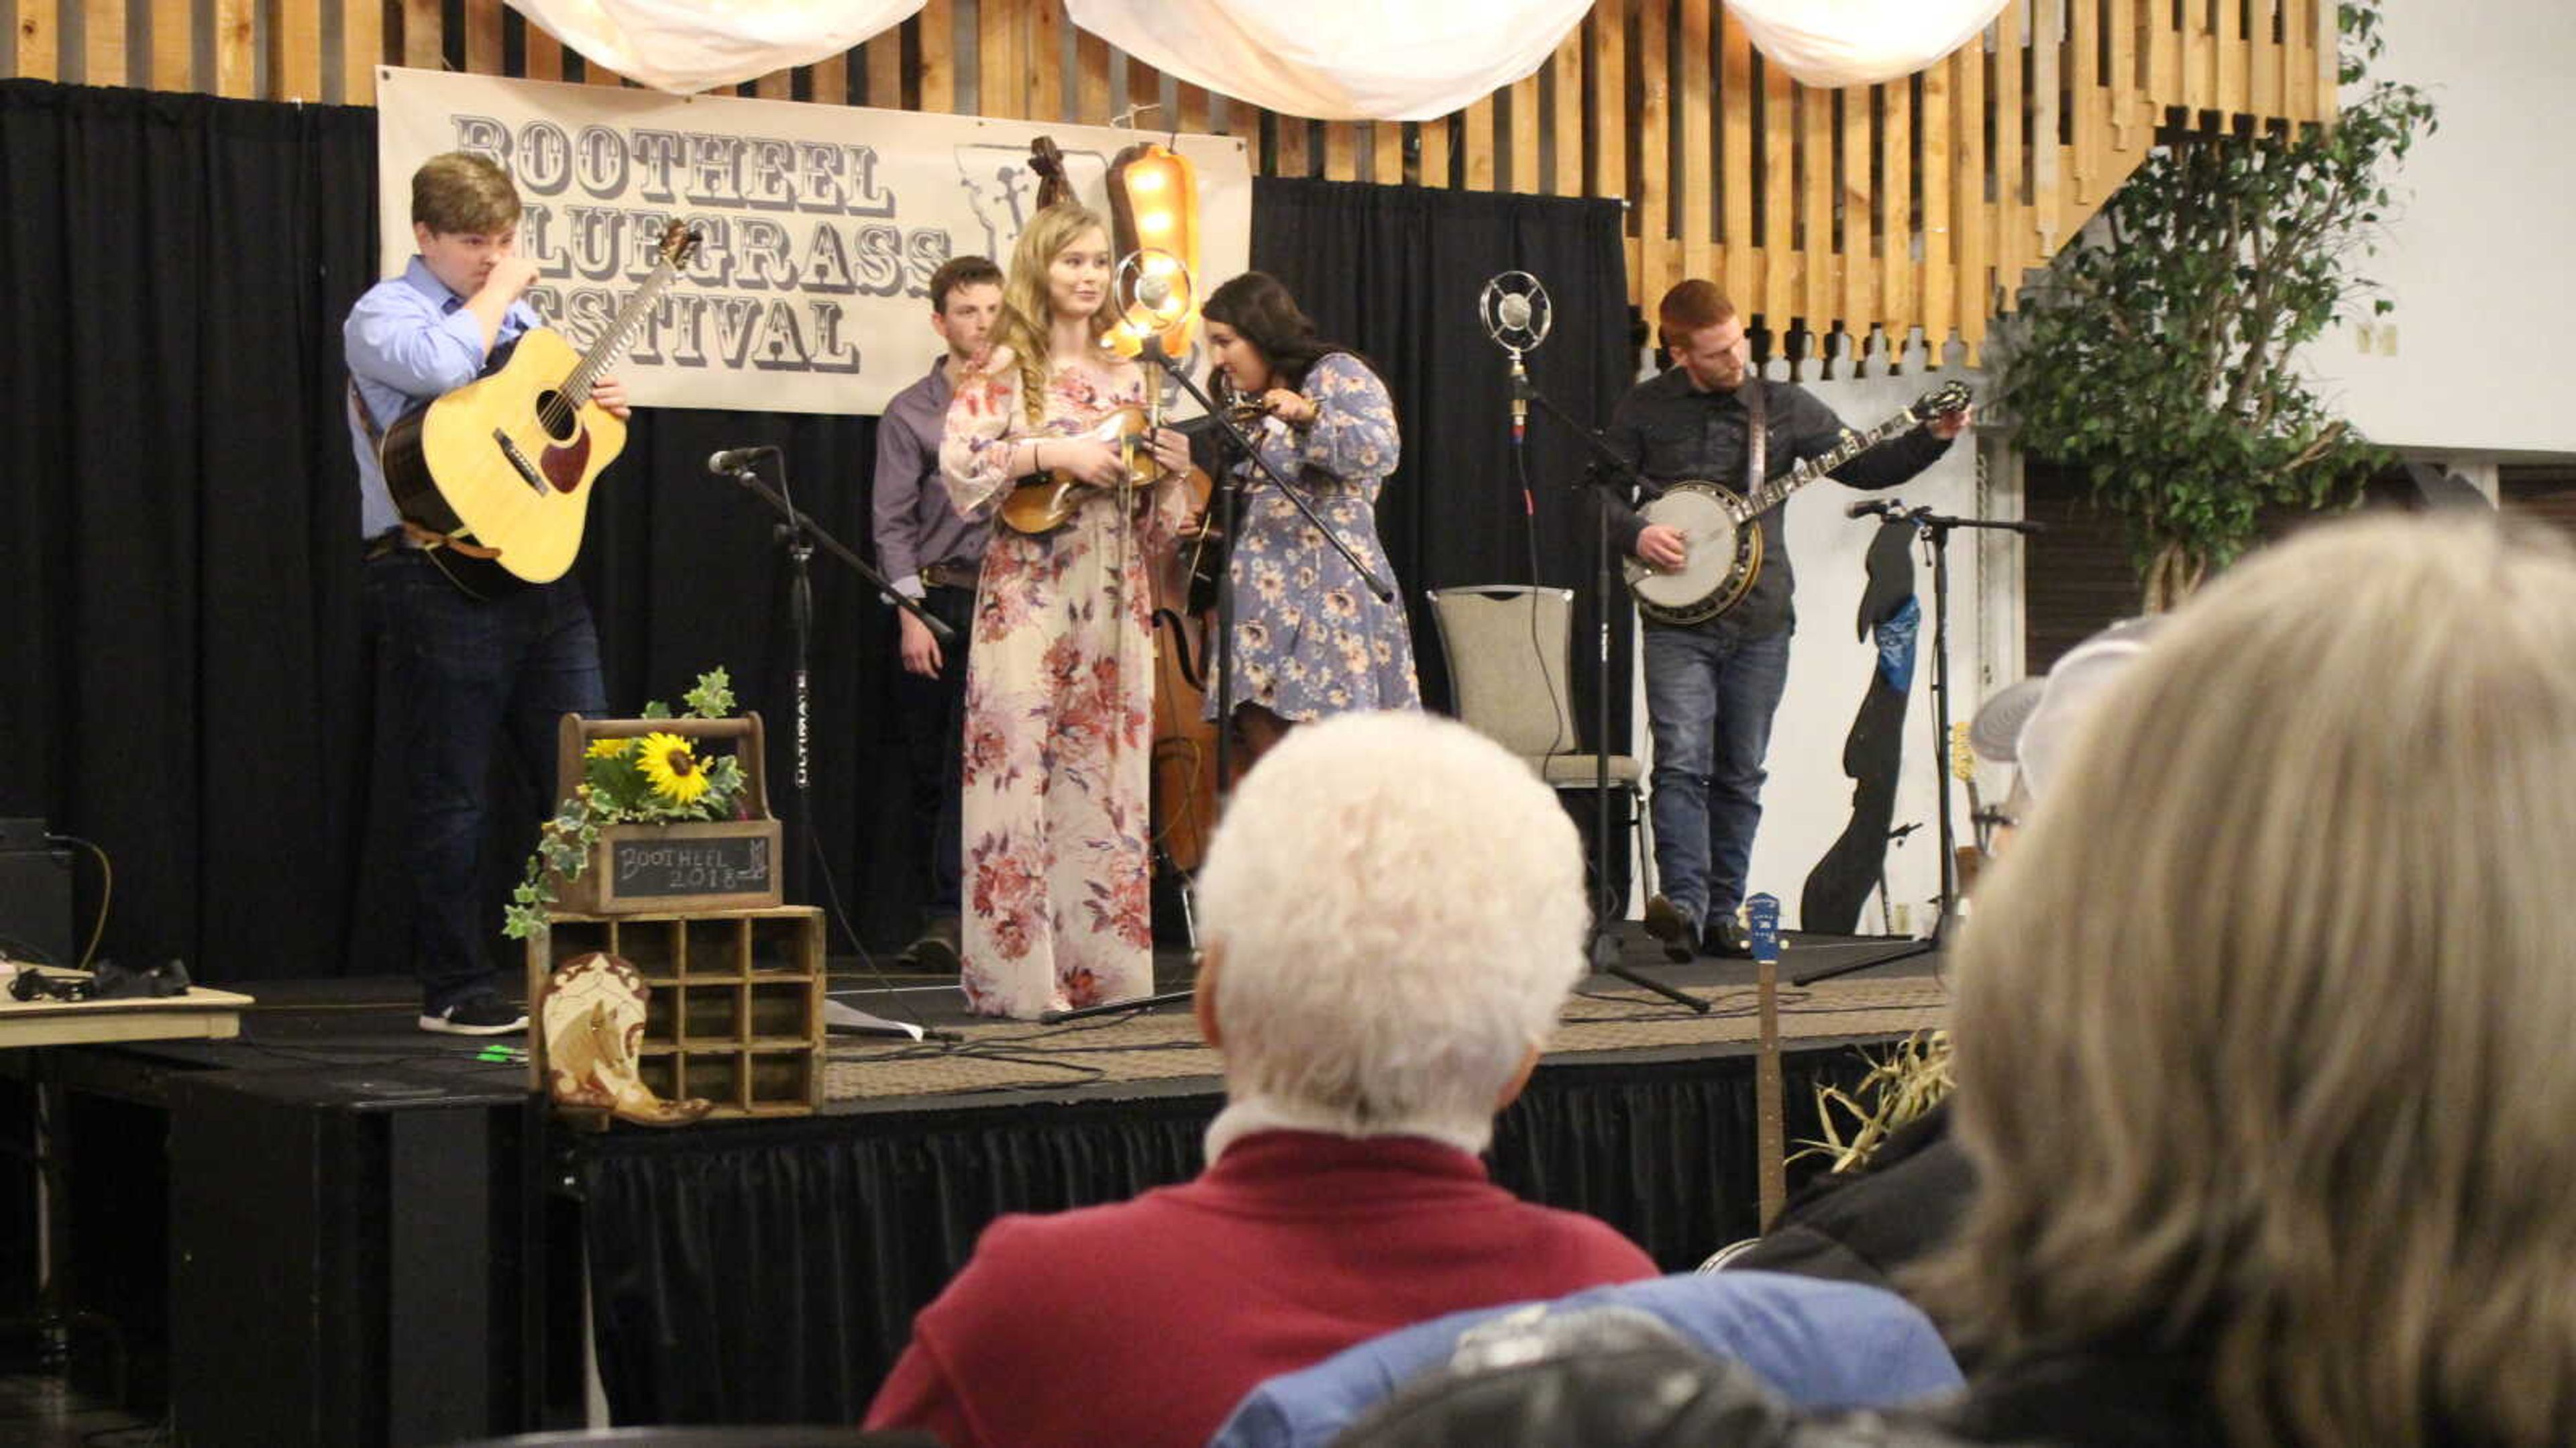 Po' Anna, a five-piece bluegrass band tune their instruments between songs during a performance at the Bootheel Bluegrass Festival at the Bavarian Halle in Jackson Jan. 27.